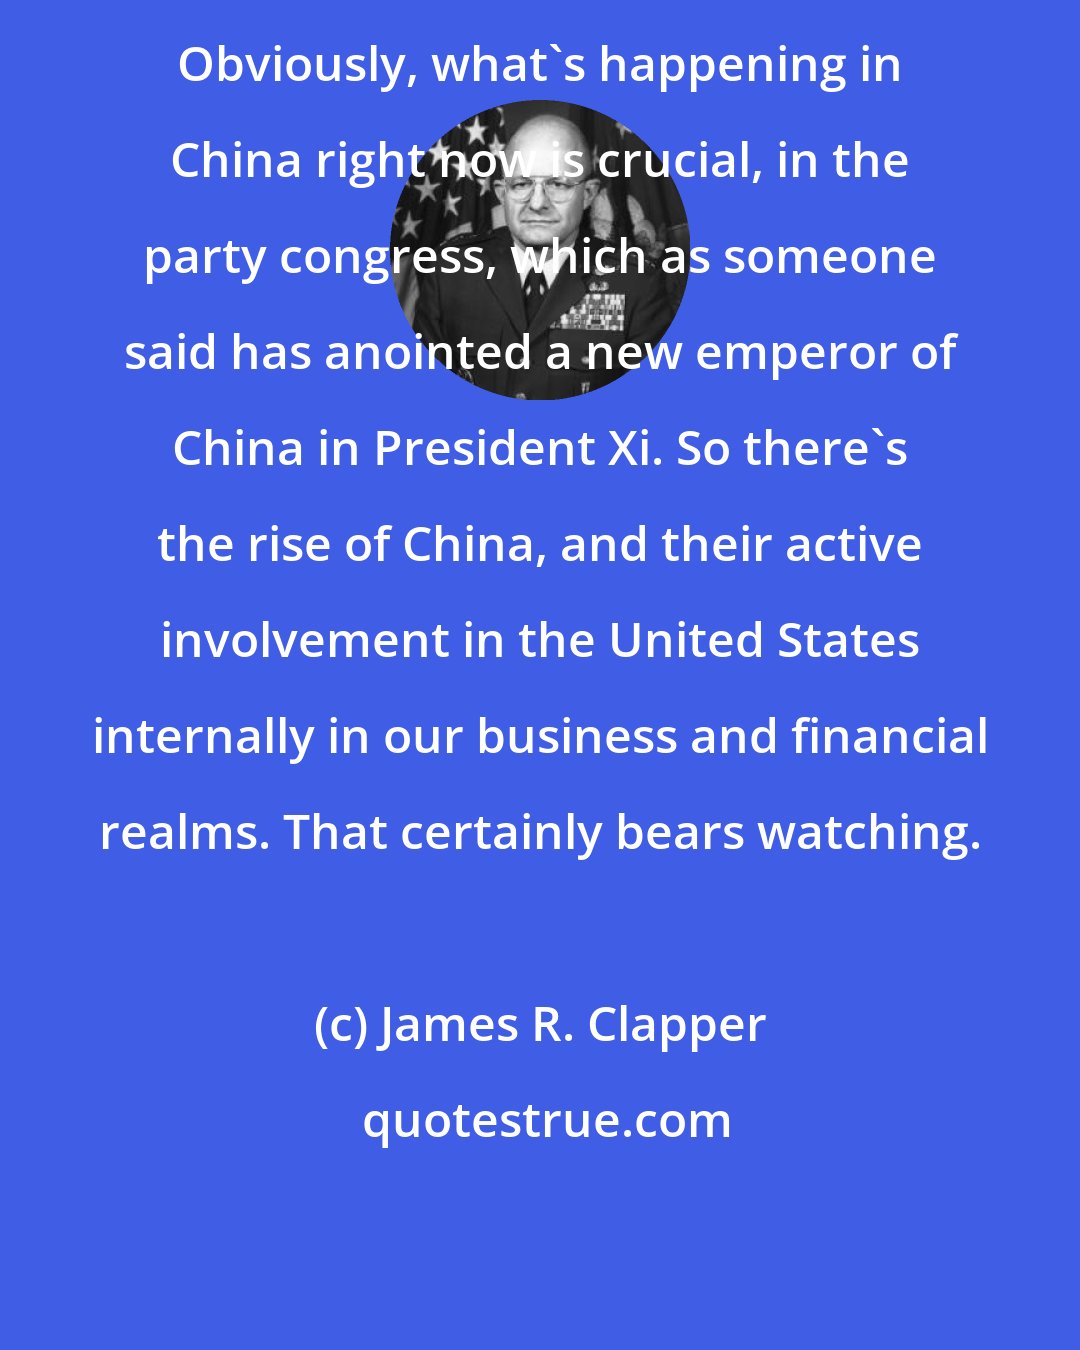 James R. Clapper: Obviously, what's happening in China right now is crucial, in the party congress, which as someone said has anointed a new emperor of China in President Xi. So there's the rise of China, and their active involvement in the United States internally in our business and financial realms. That certainly bears watching.